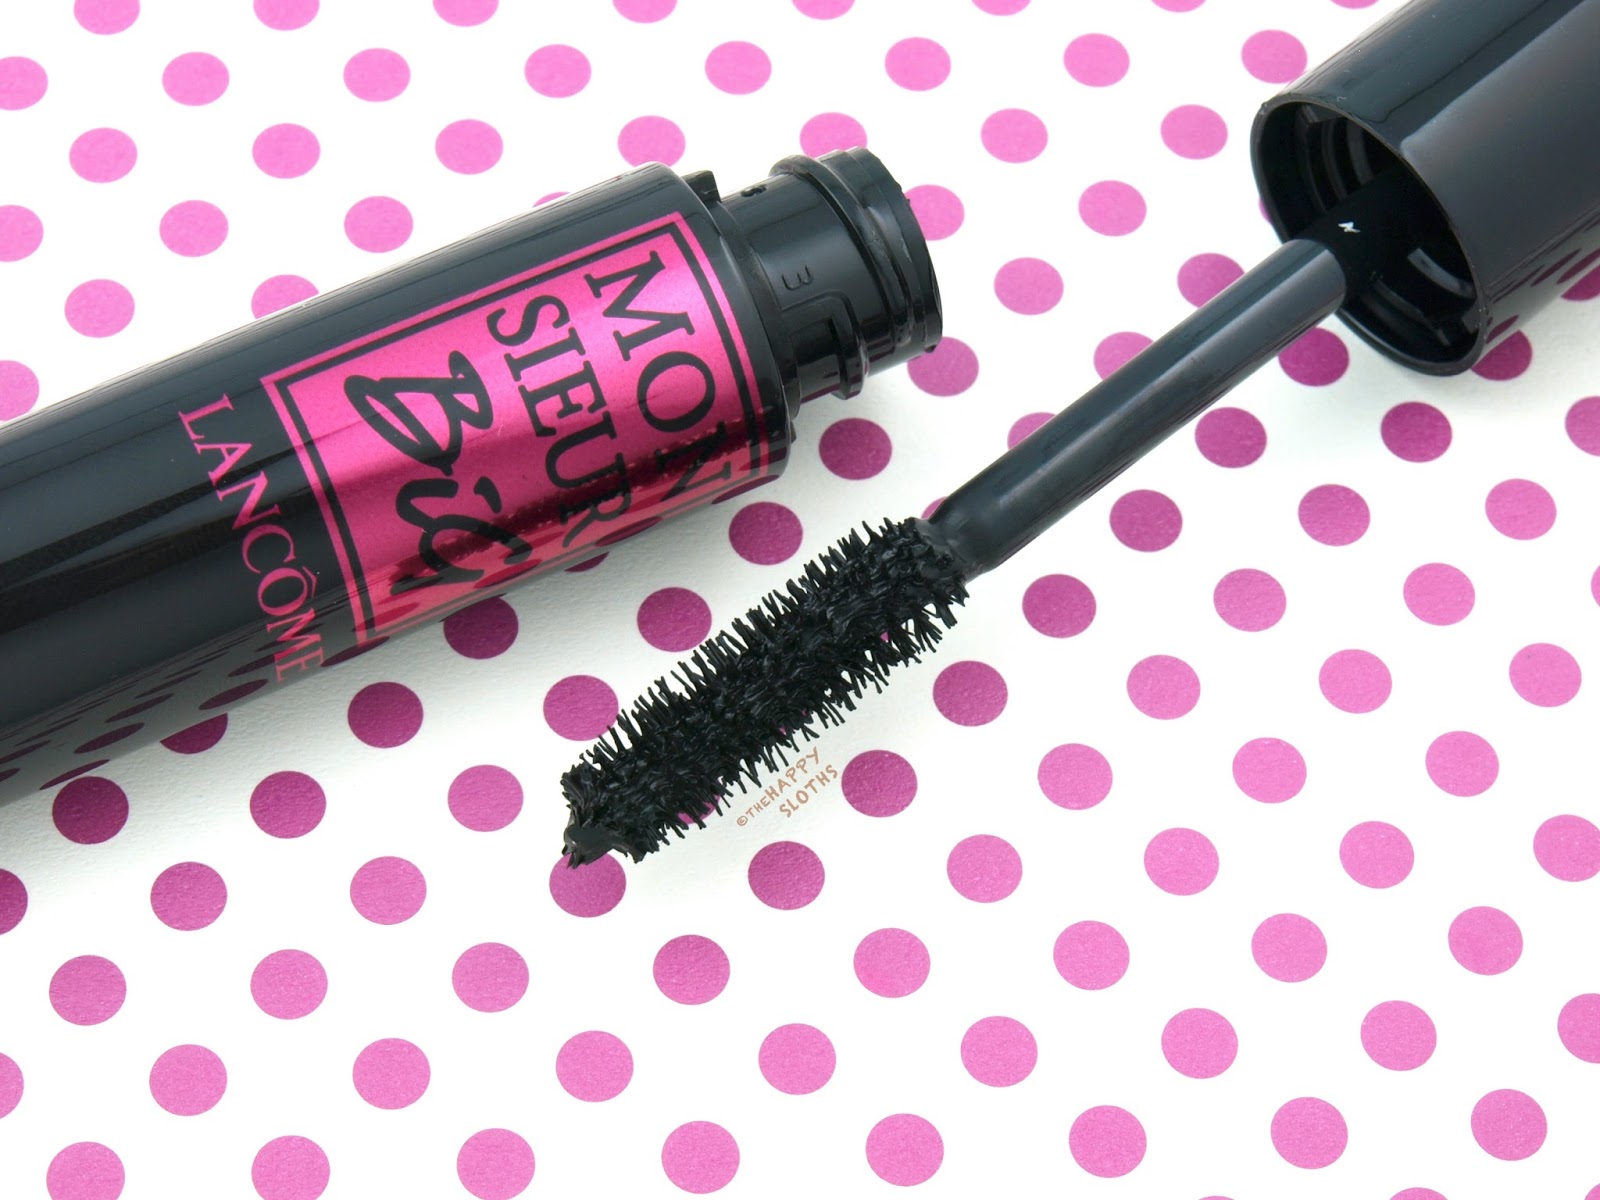 Lancome Monsieur Big Mascara: Review and Swatches